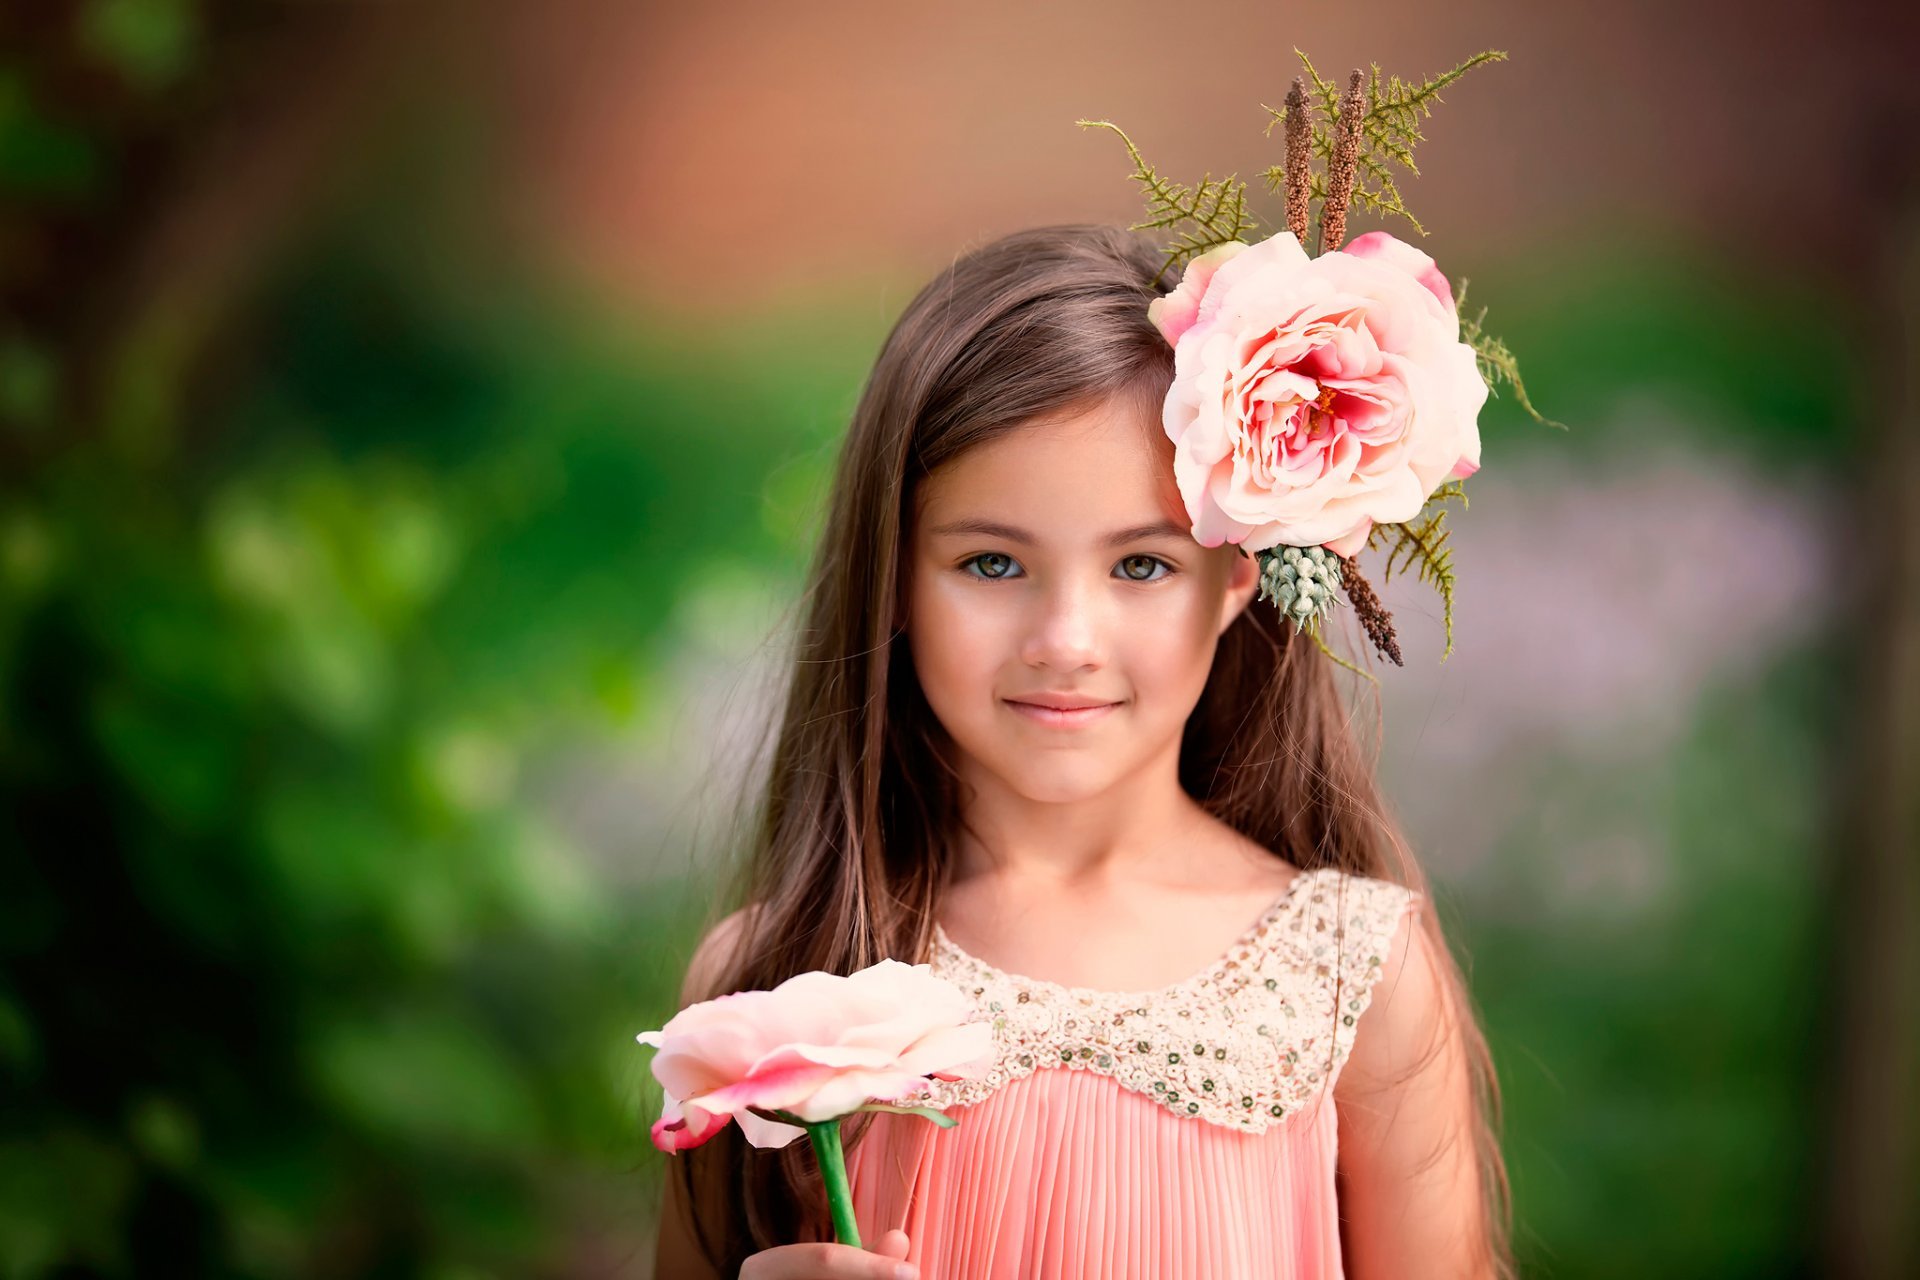 Children With Flowers Wallpapers High Quality | Download Free